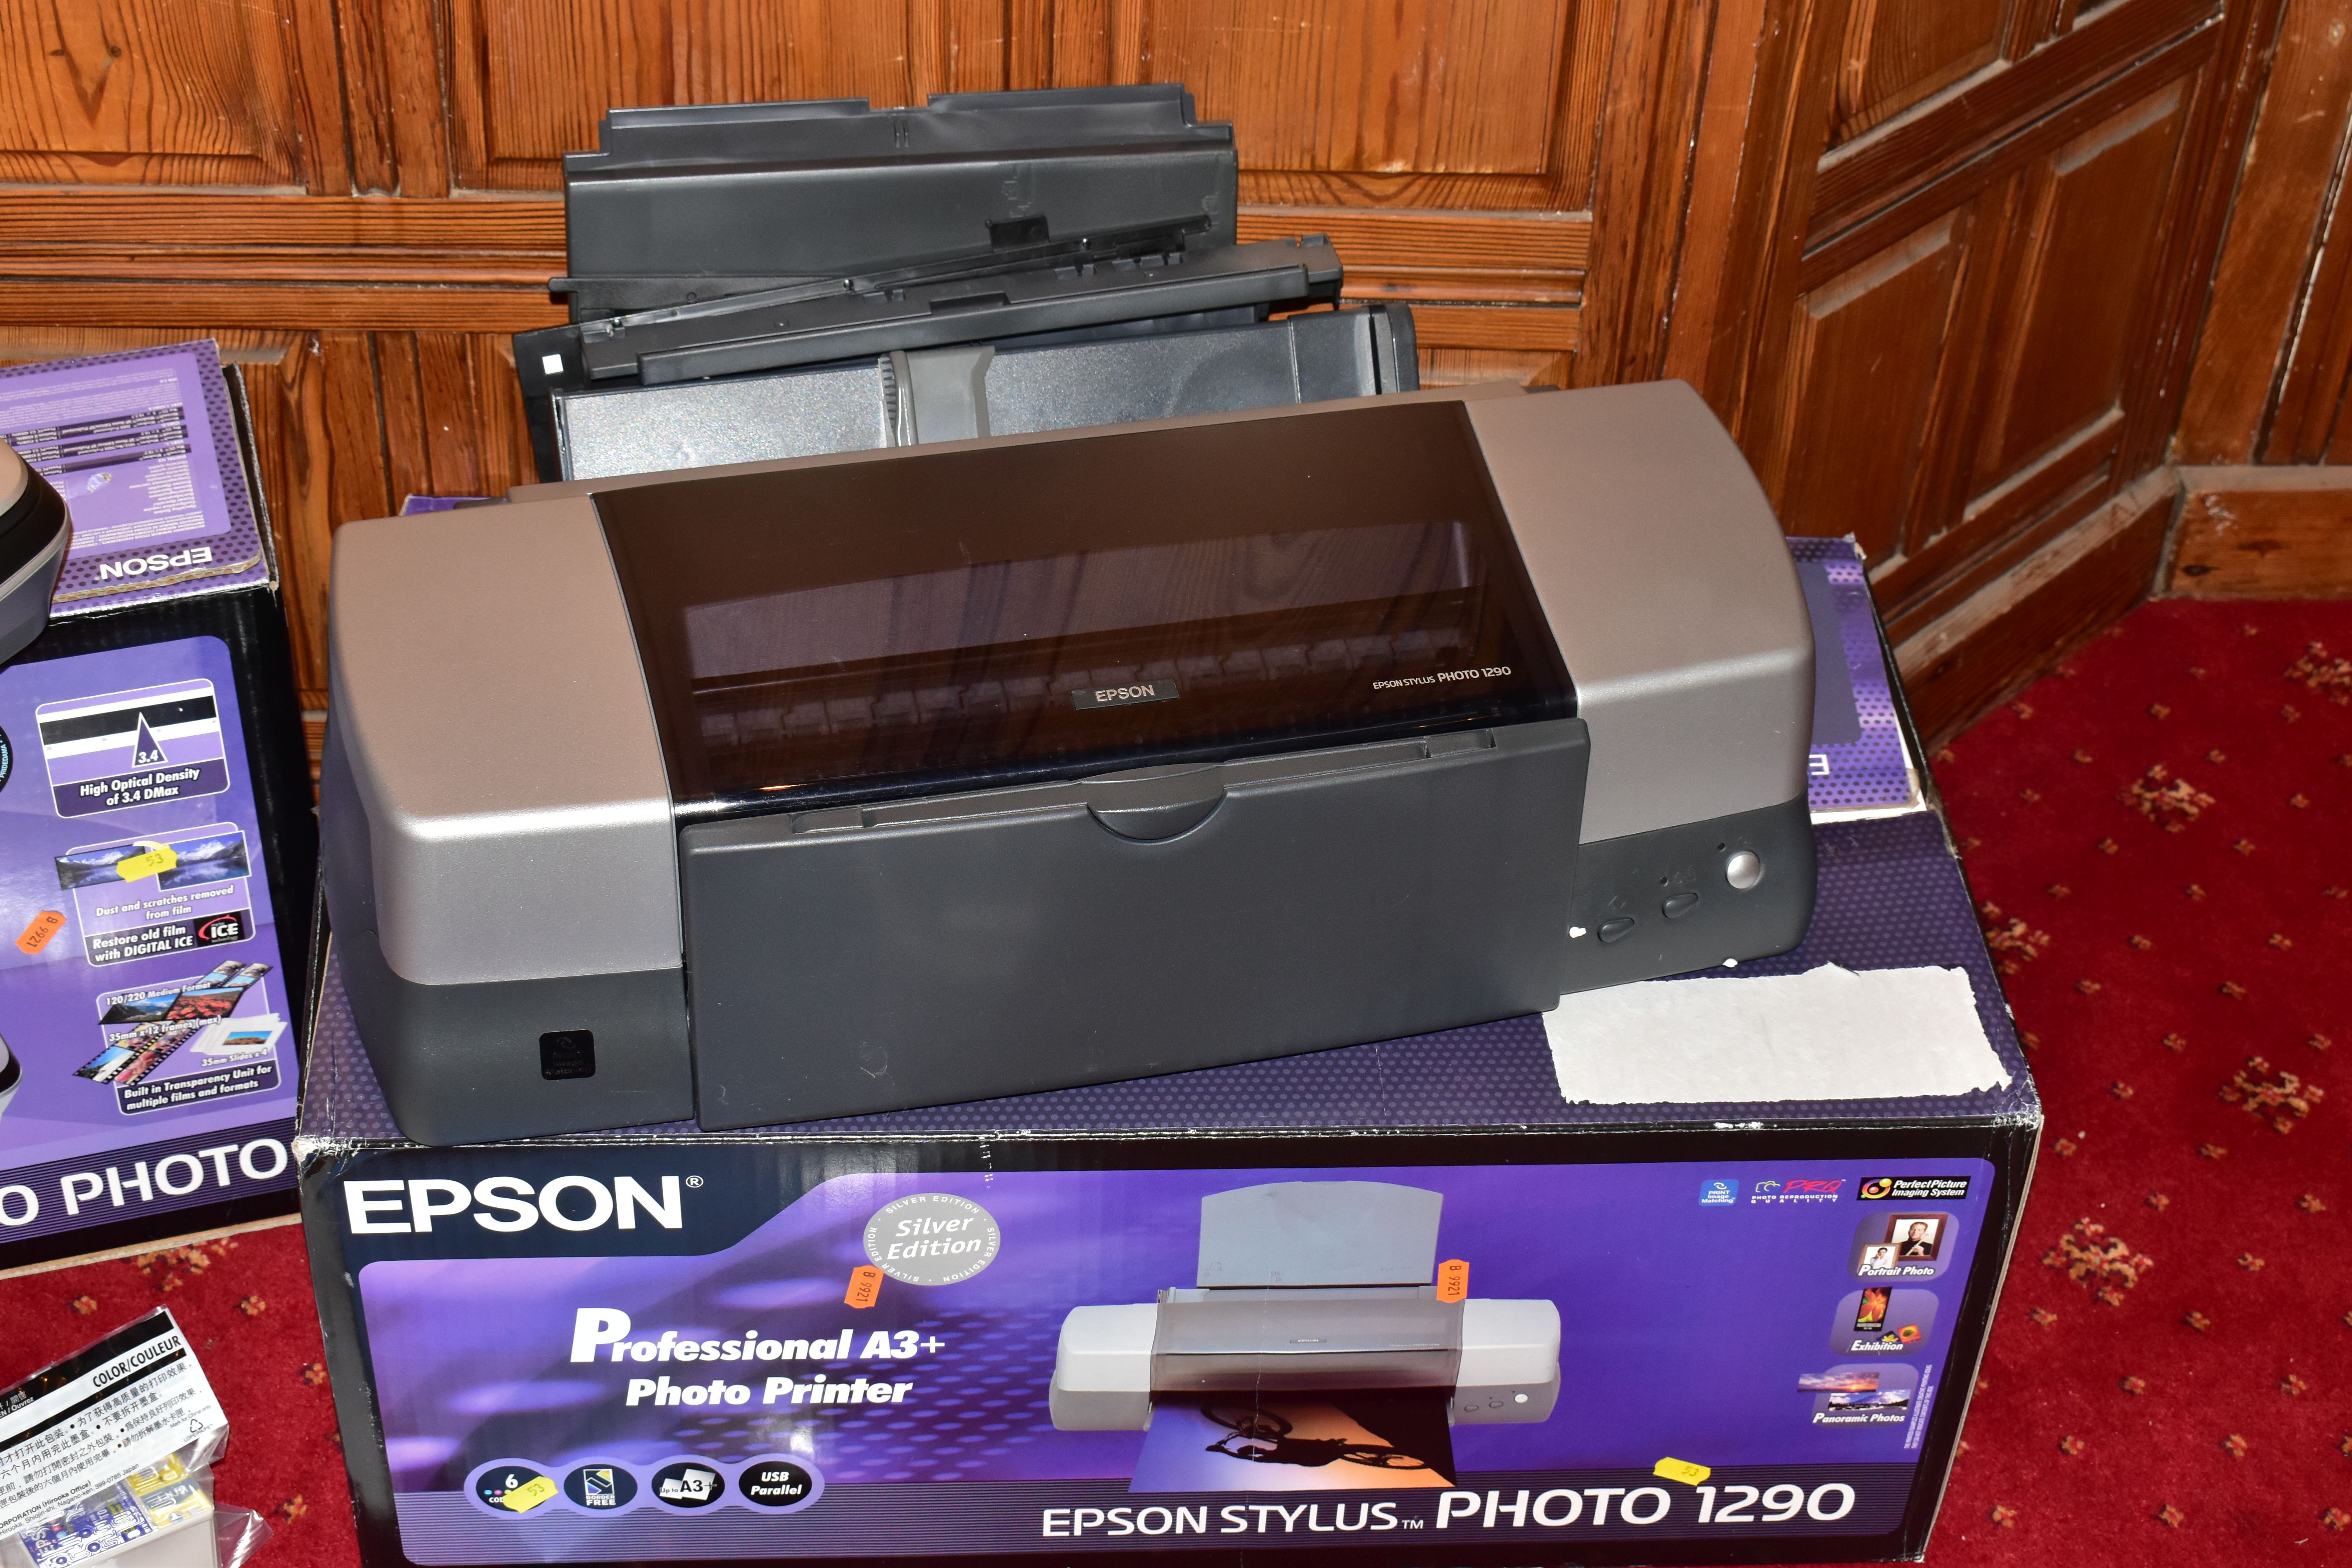 AN EPSON STYLUS PHOTO 1290 PROFESSIONAL A3 PRINTER in box with spare cartridges, manual, disc and an - Image 2 of 6